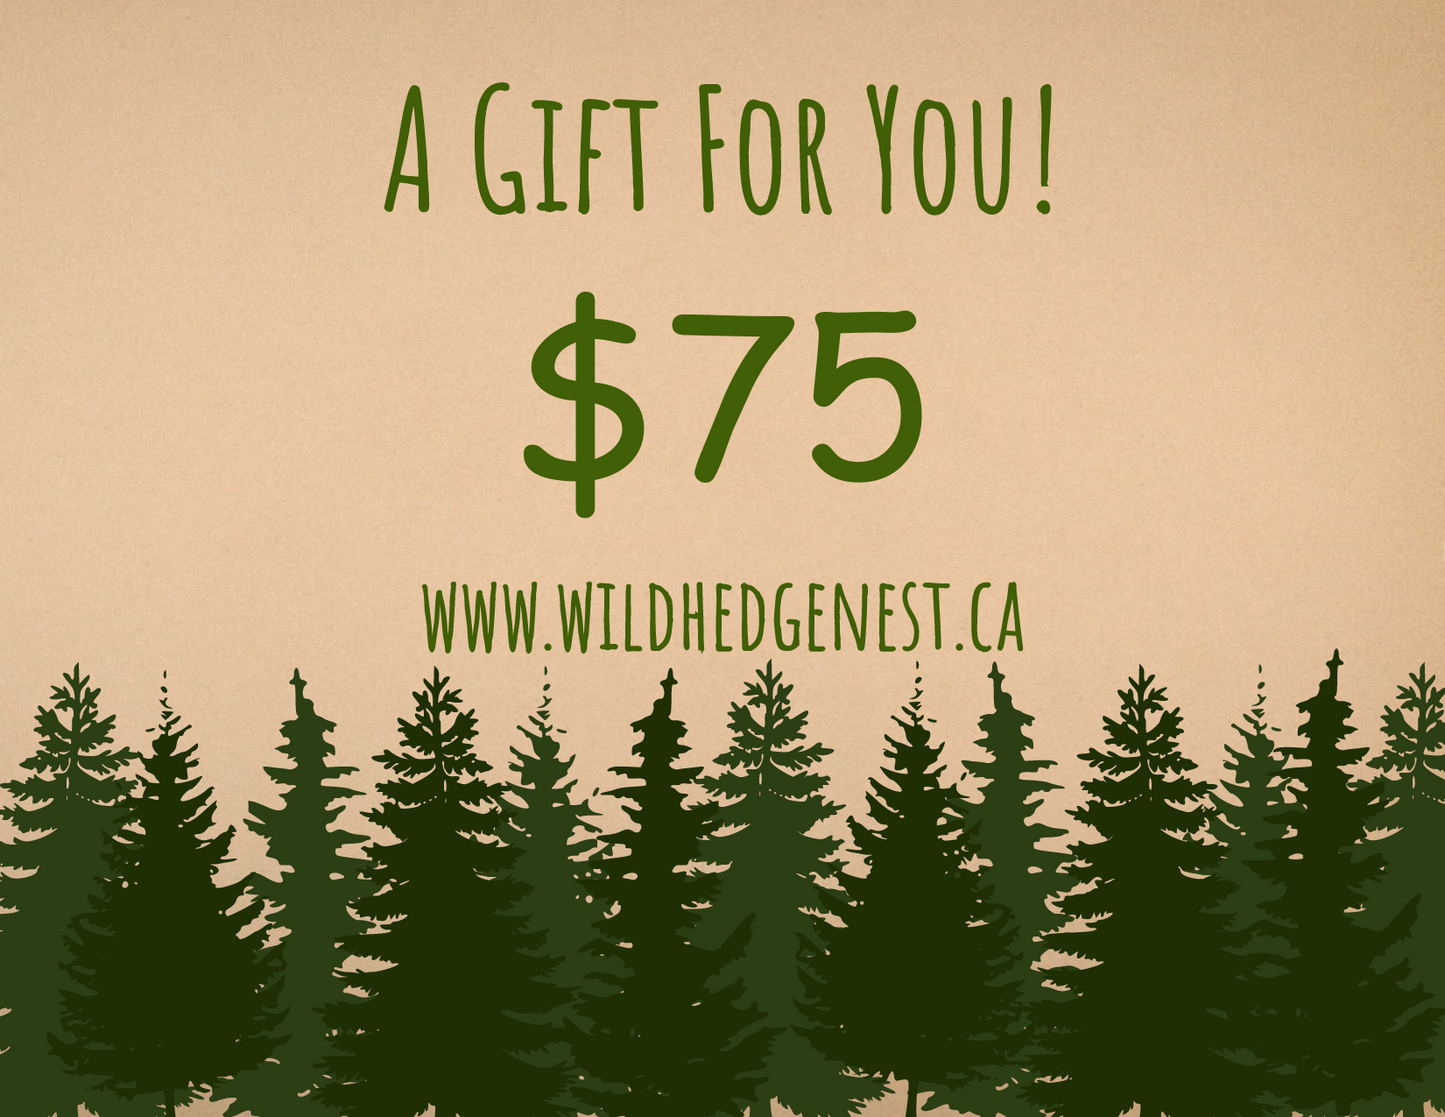 4 $75 WILD HEDGE NEST FOREST e-GIFT CARD